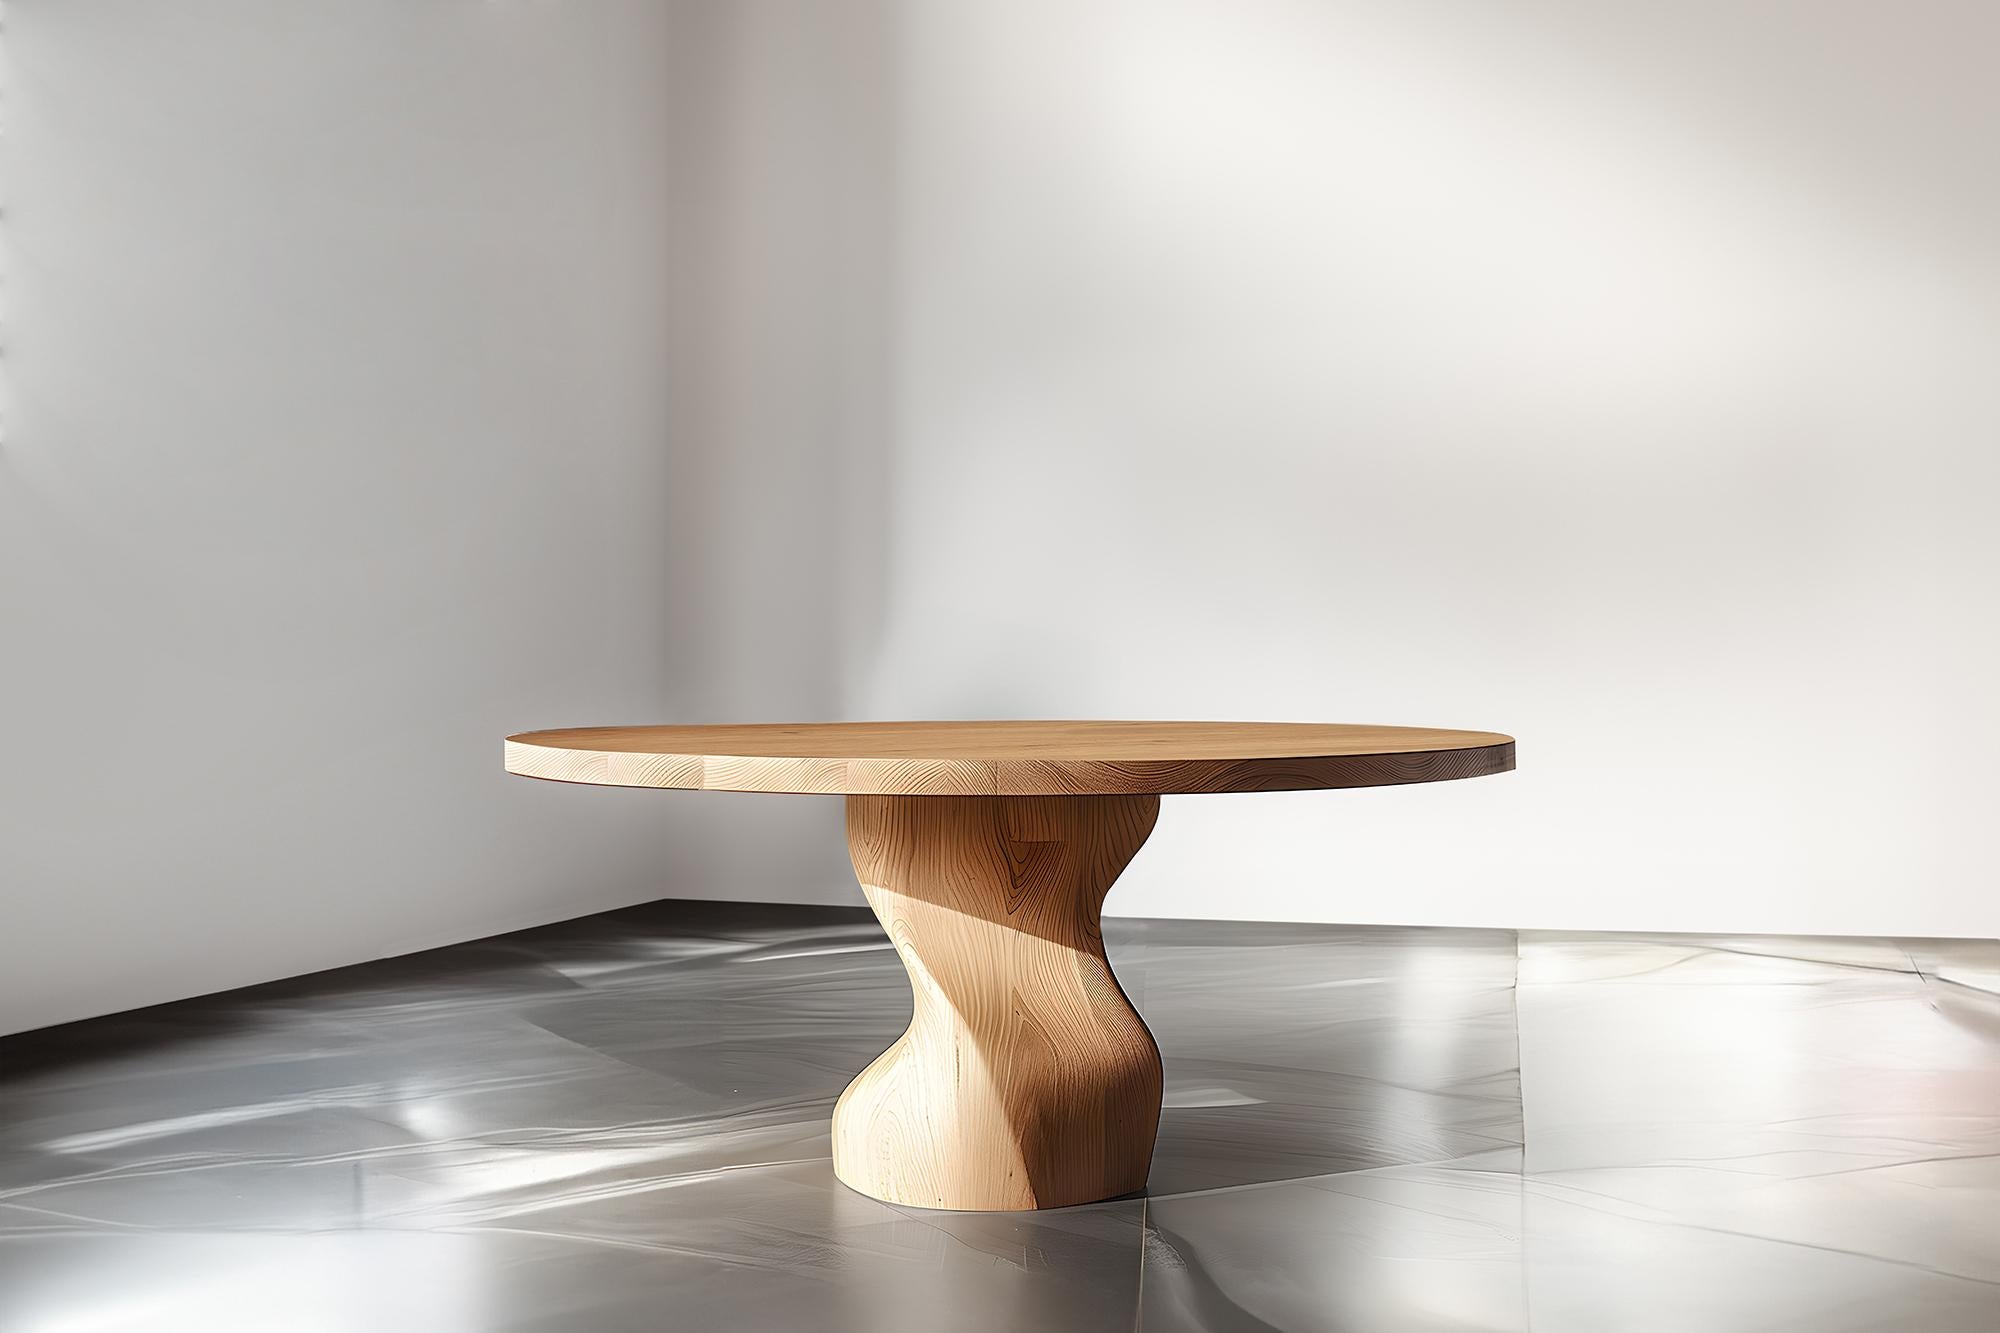 Solid Wood Socle Desks, Crafting Workspaces by Joel Escalona No16
——

Introducing the 